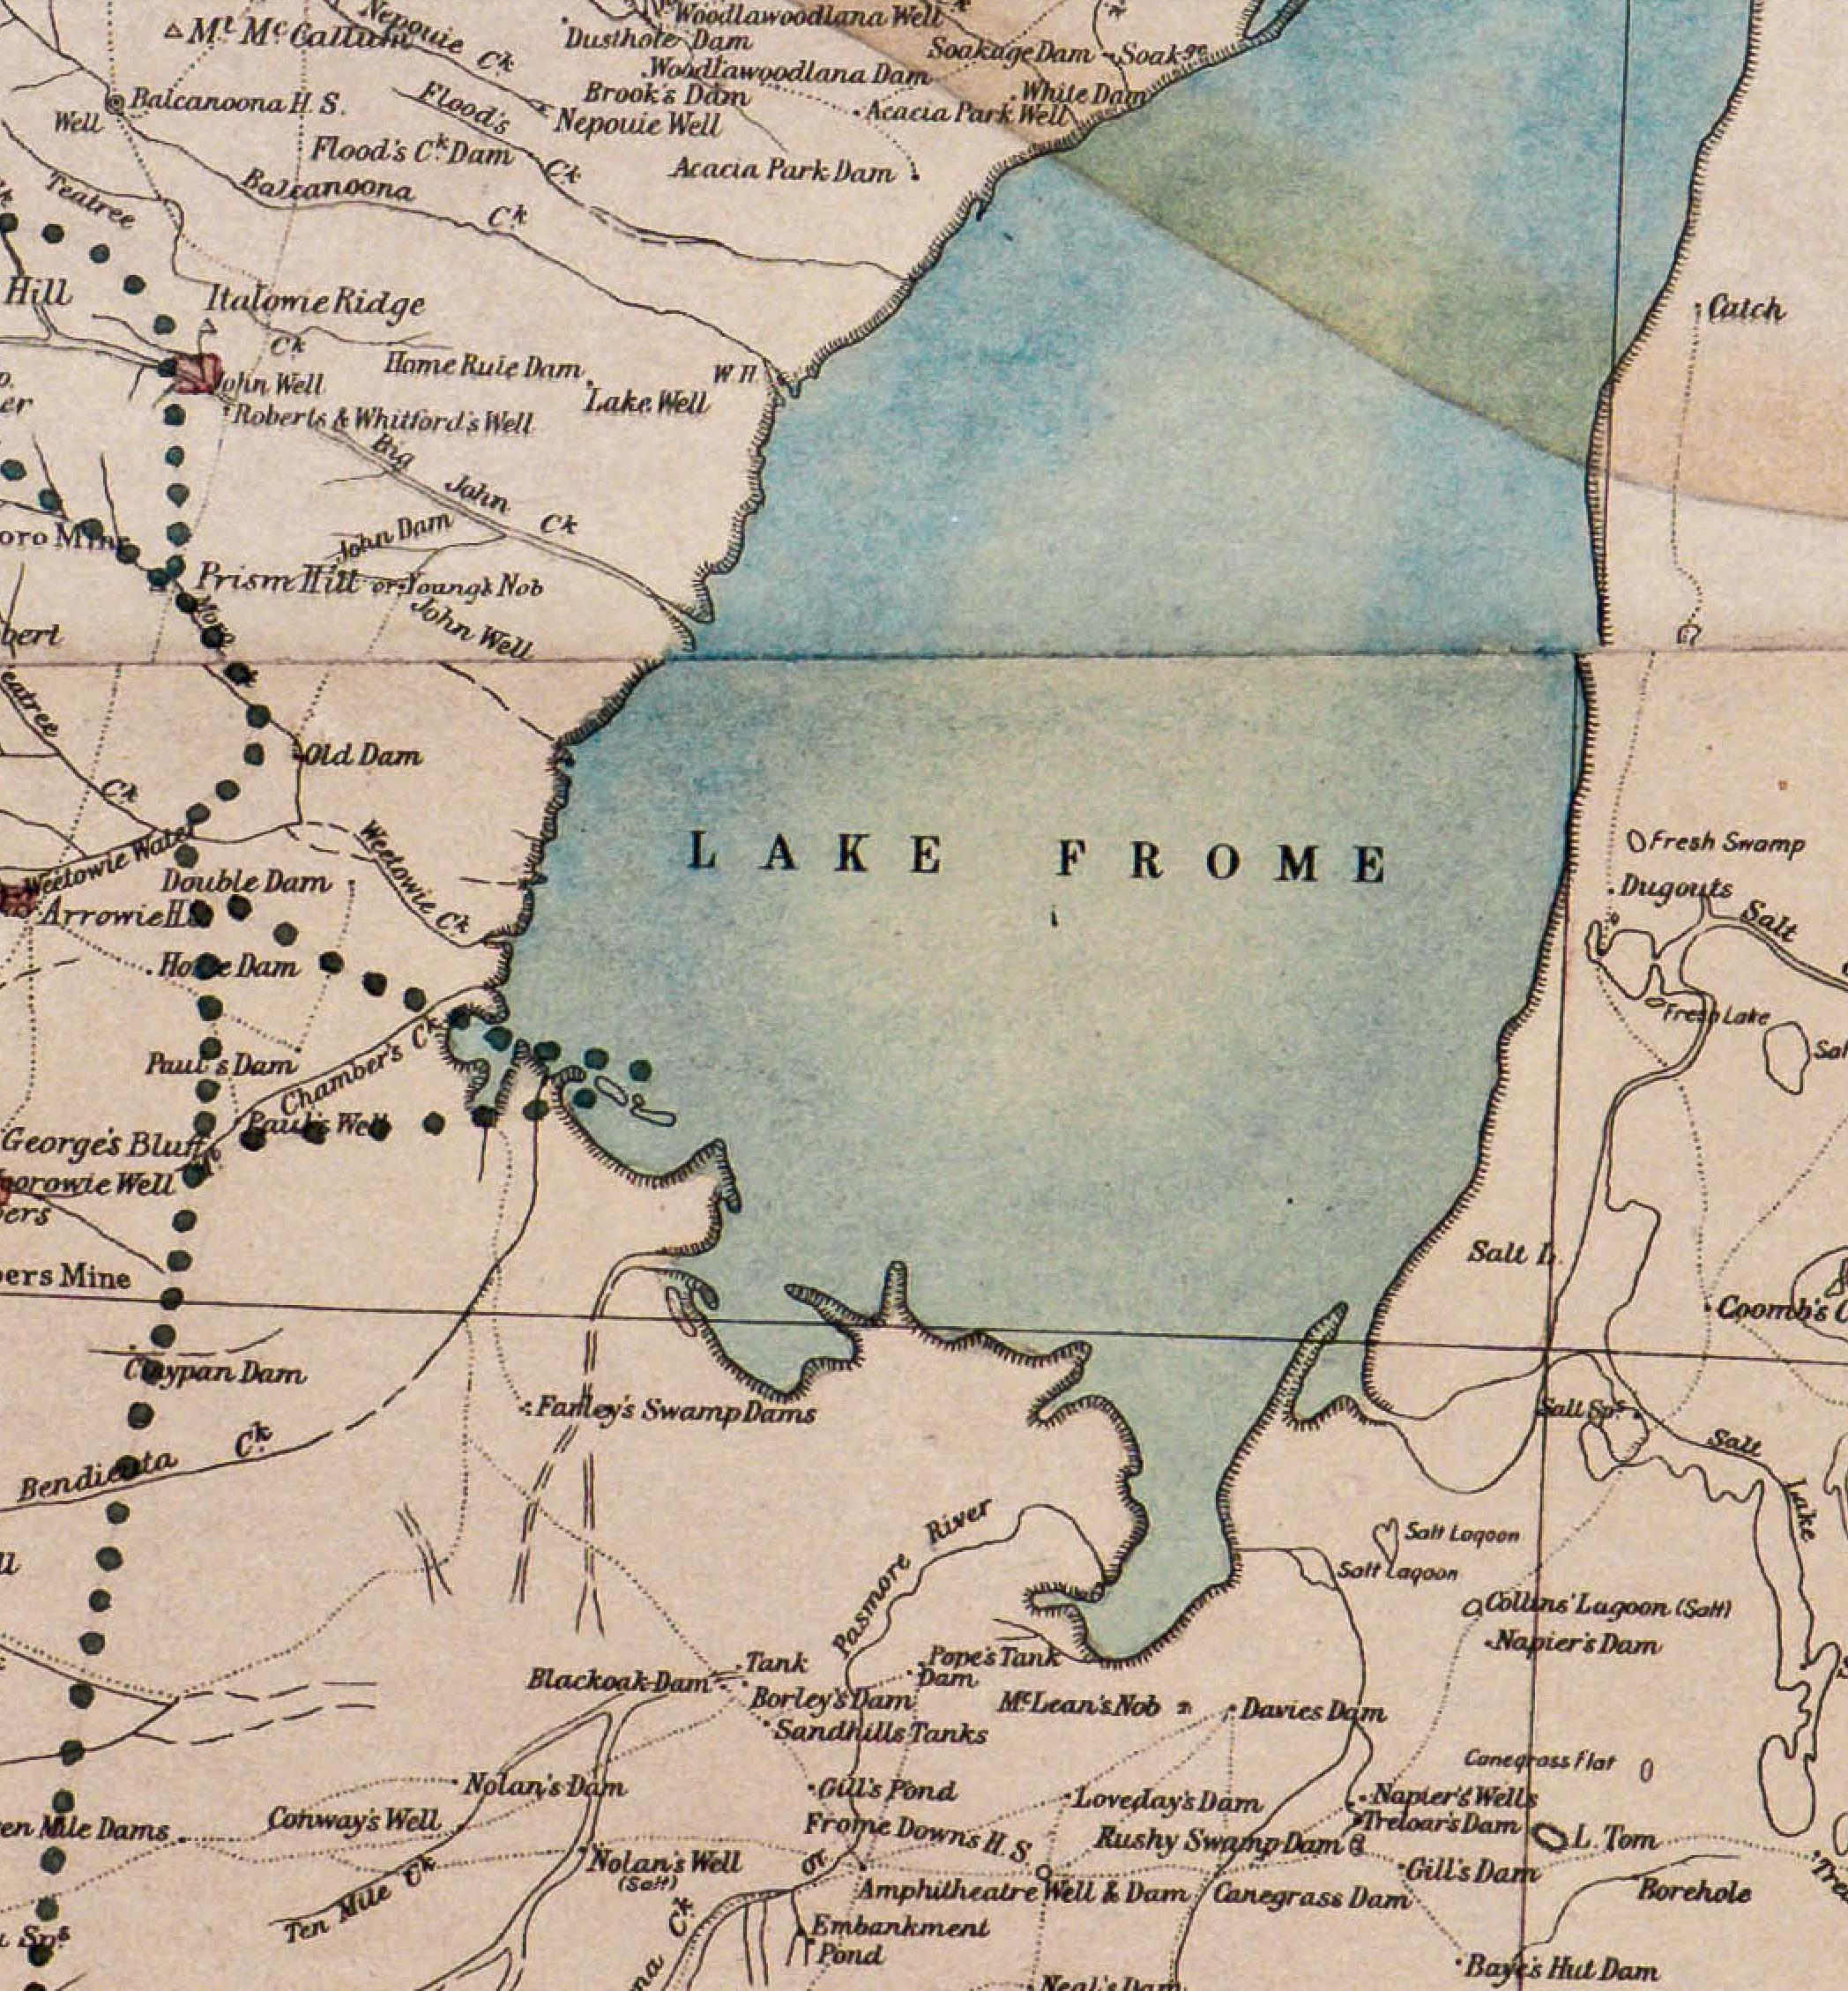 Example detail around Lake Frome